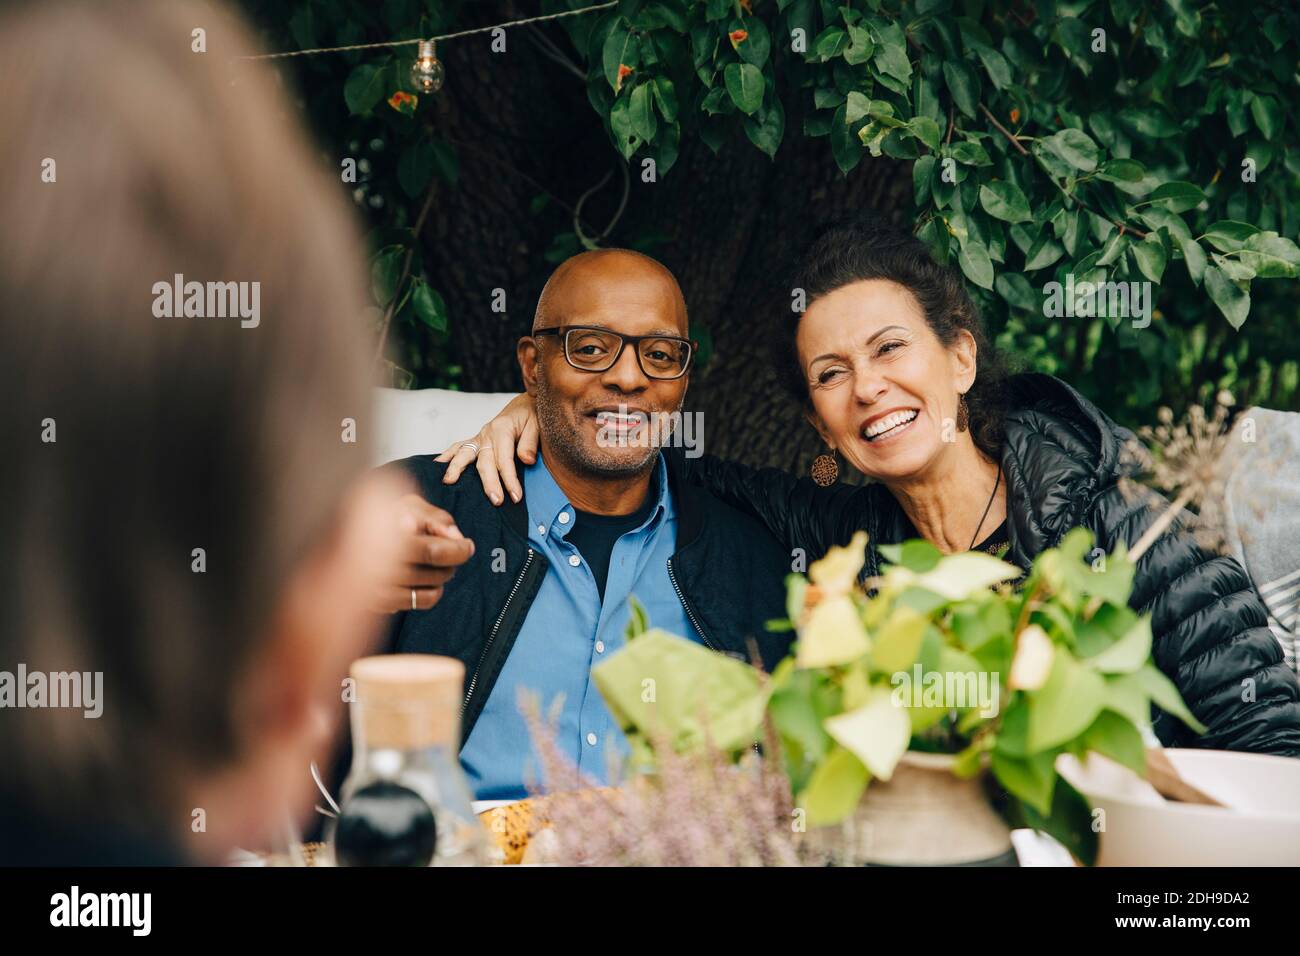 Cheerful senior woman sitting with arm around man while enjoying dinner party at back yard Stock Photo